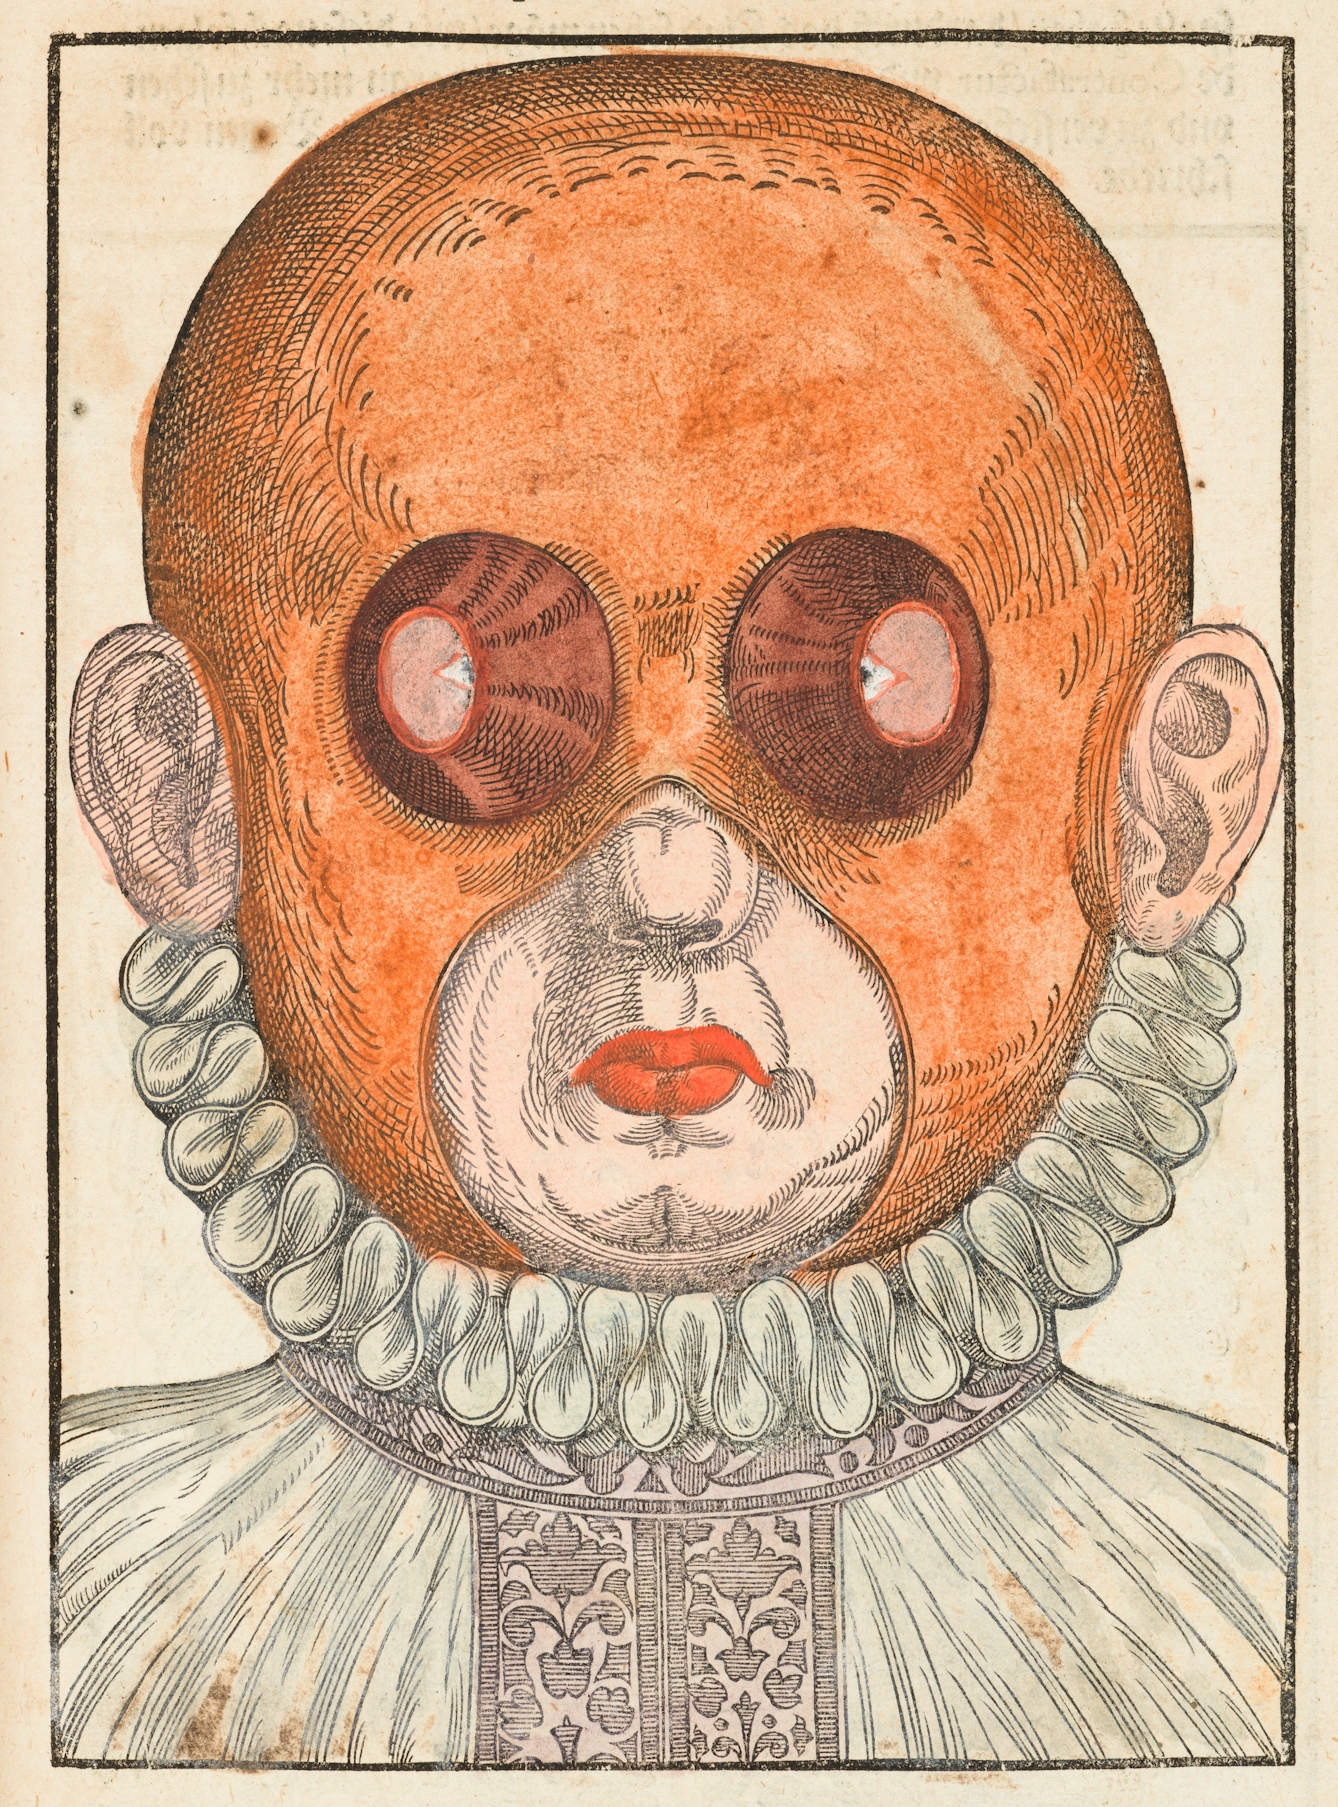 Coloured engraving from a 16th century book showing a person's head and neck ruff. On their head is a red mask which has small holes exposing the outside edges of their eyes and larger holes exposing their ears, nose and mouth.